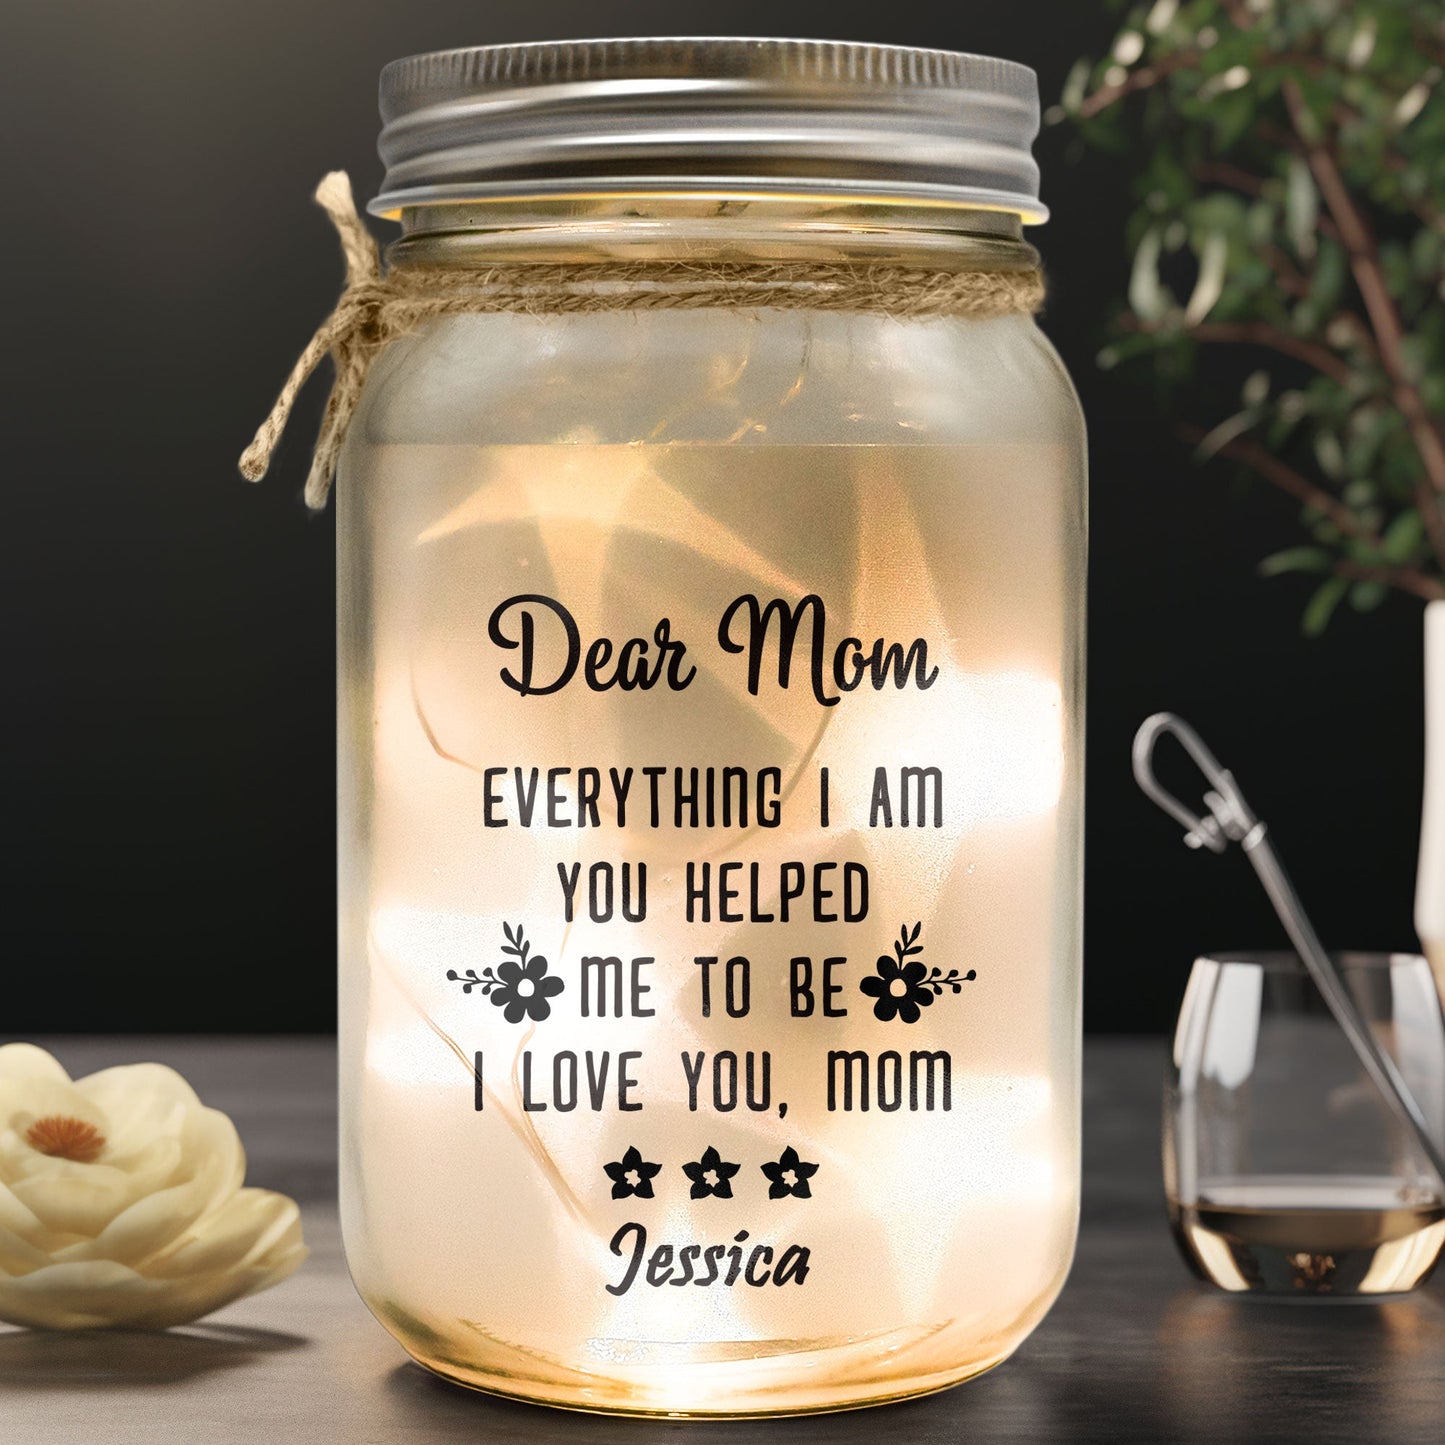 Everything I Am You Helped Me To Be - Personalized Mason Jar Light